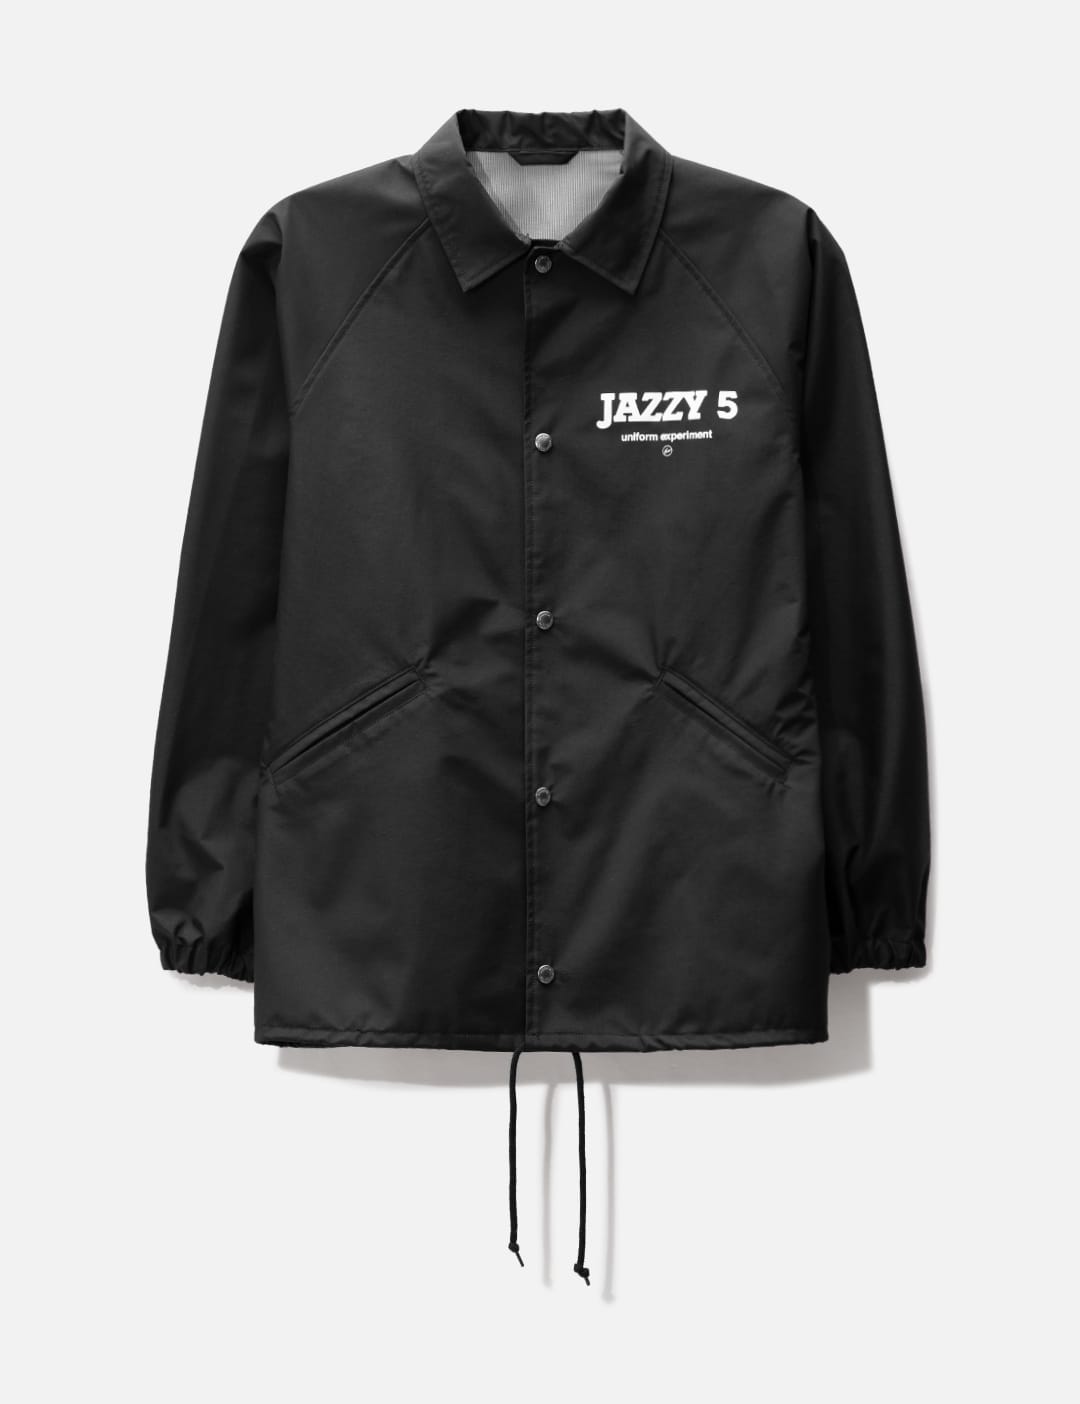 uniform experiment - FRAGMENT: JAZZY JAY/ JAZZY 5 COACH JACKET | HBX -  Globally Curated Fashion and Lifestyle by Hypebeast